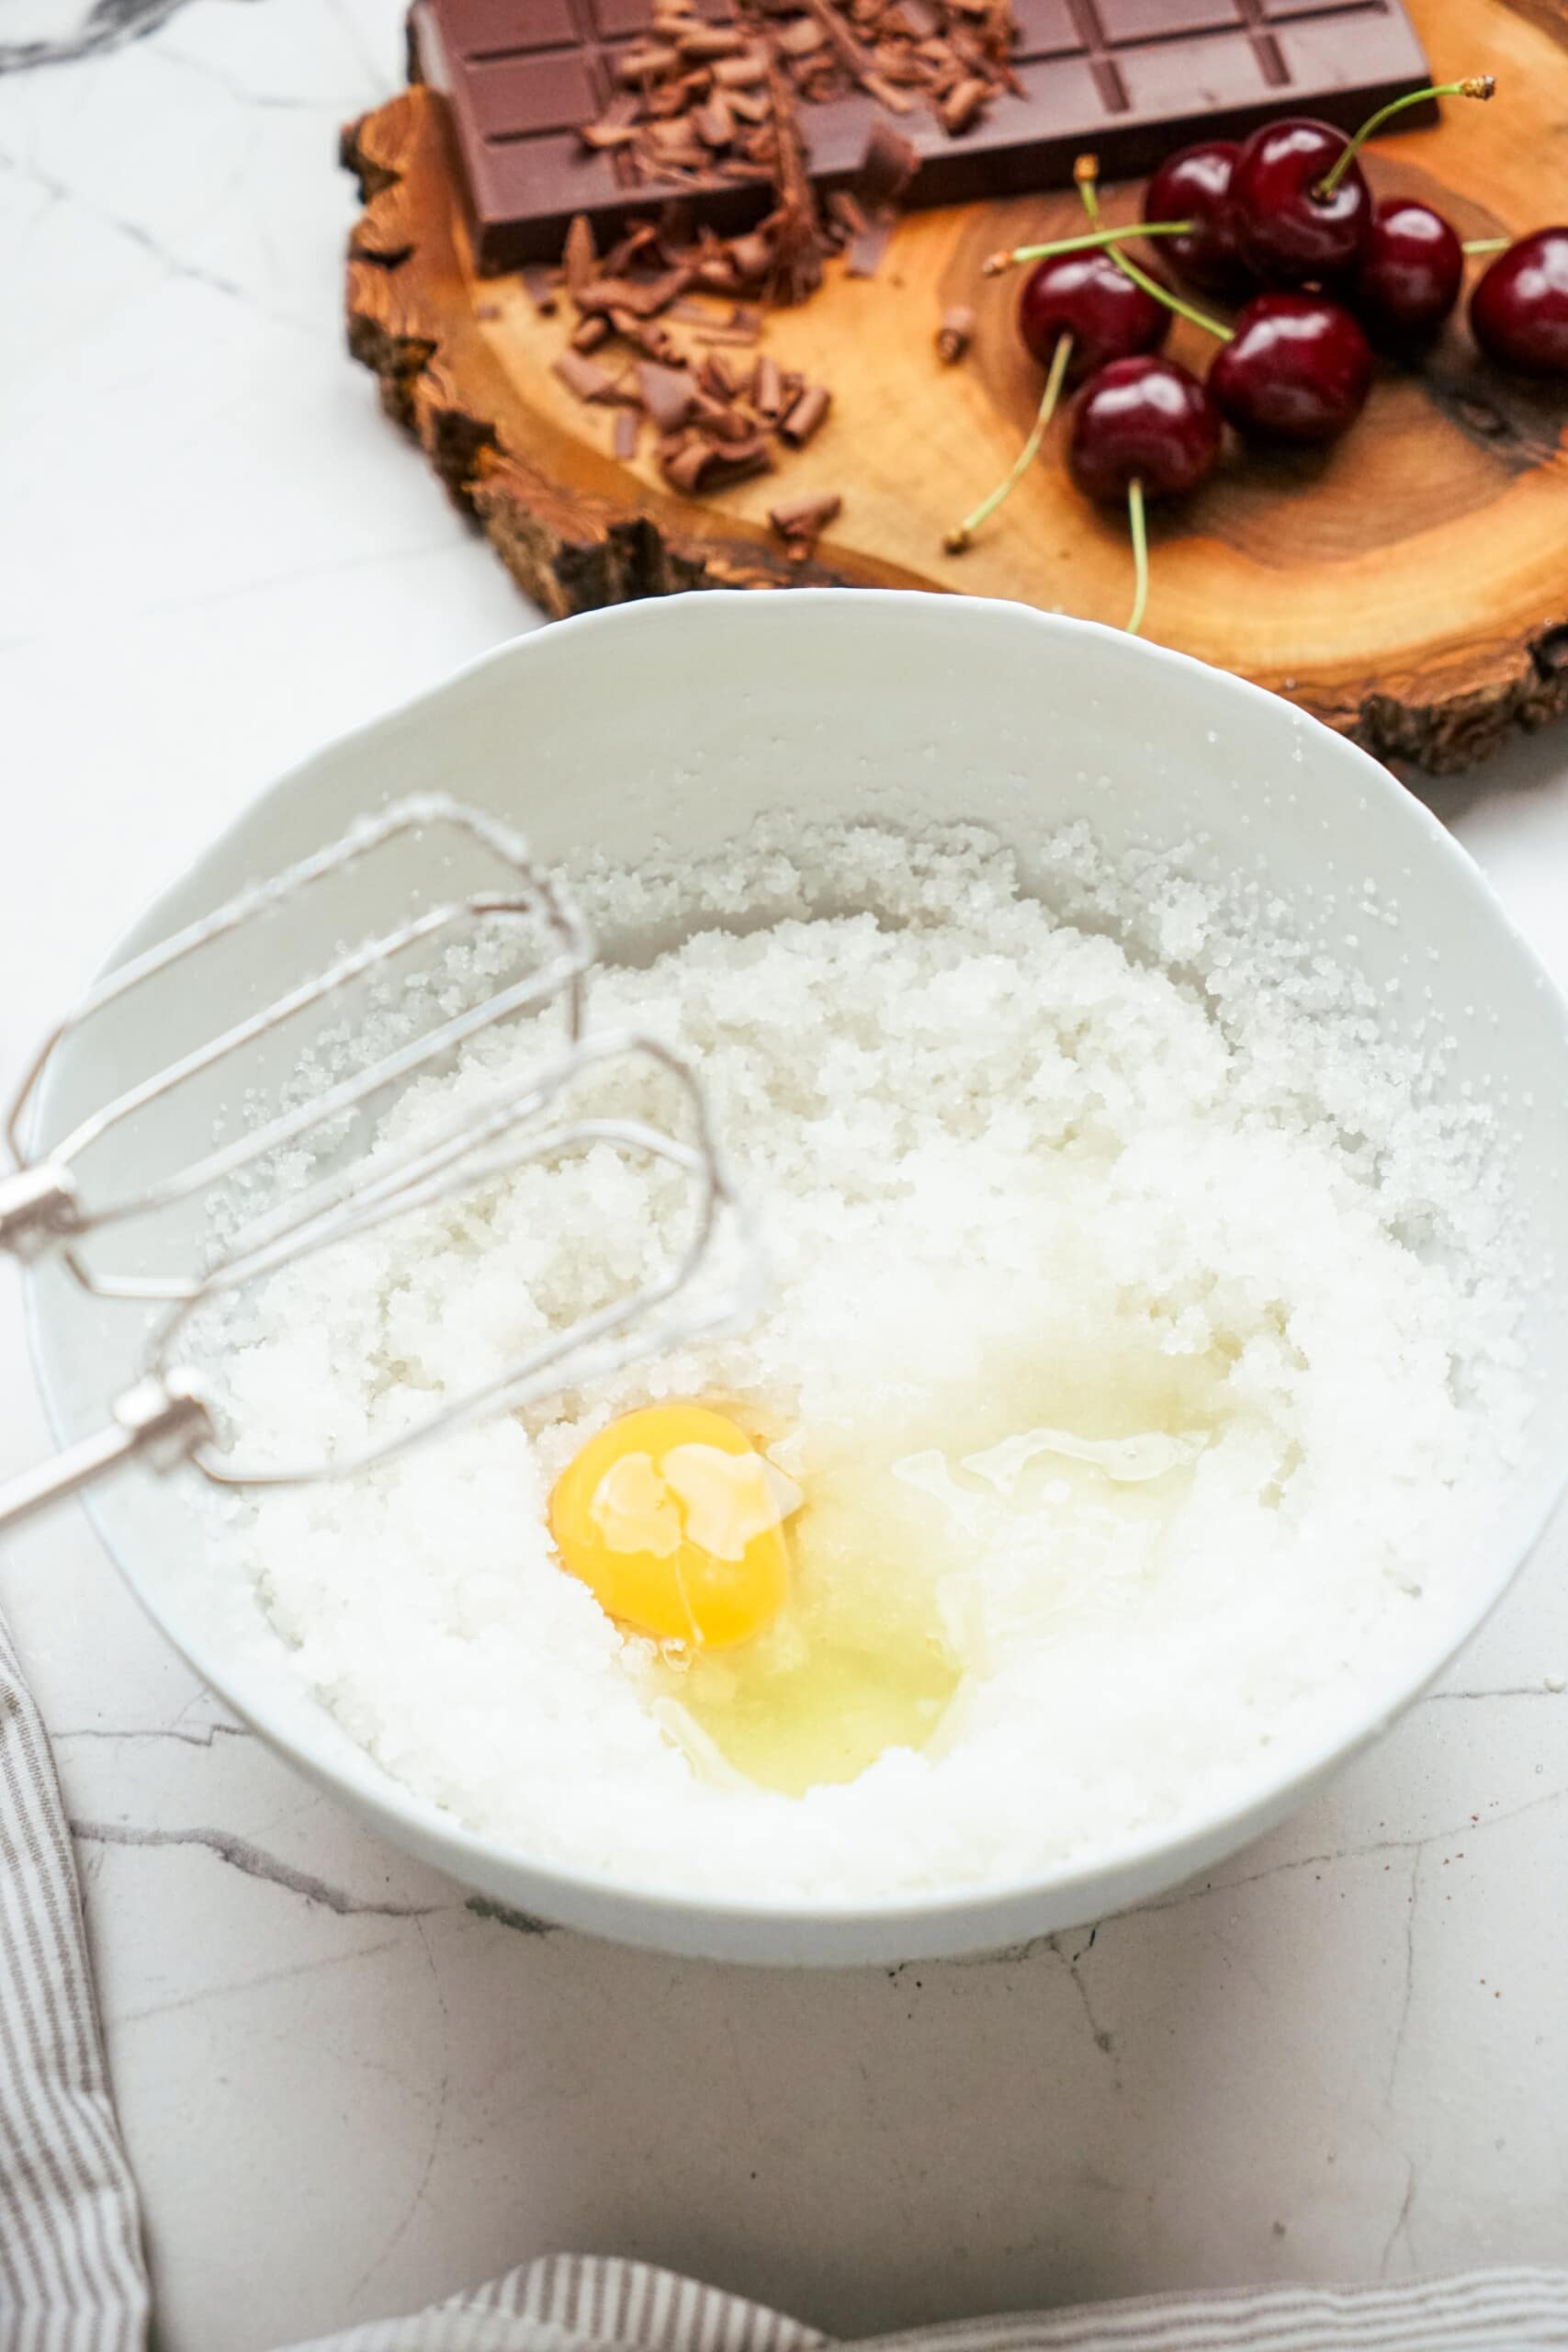 sugar and eggs being whisked together with hand mixer